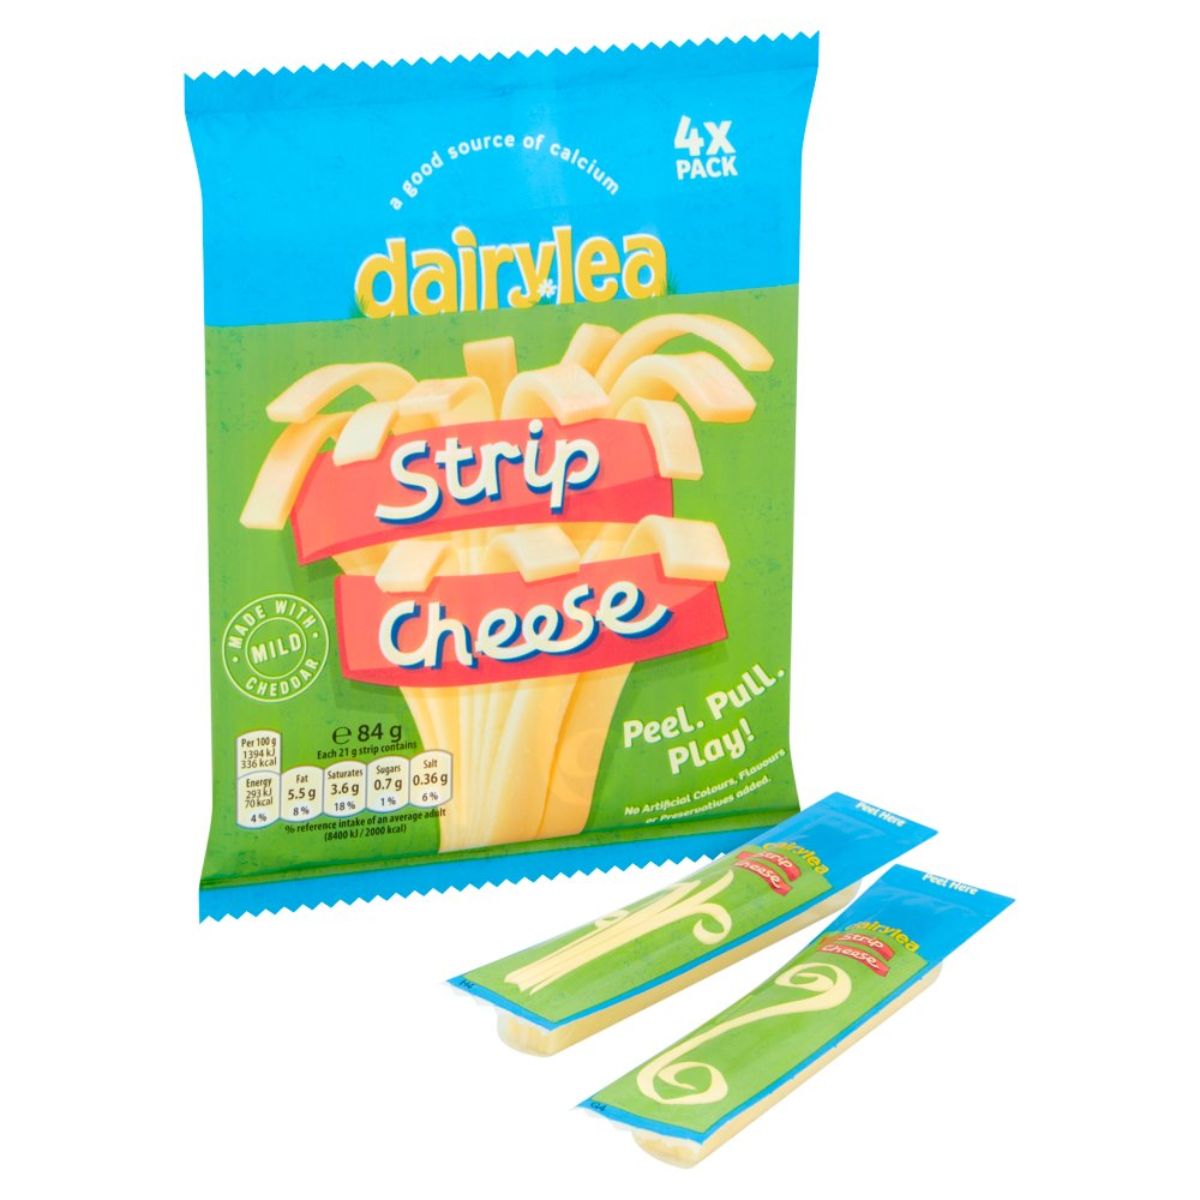 A package of Dairylea - Strip Cheese 4 Pack - 84g.